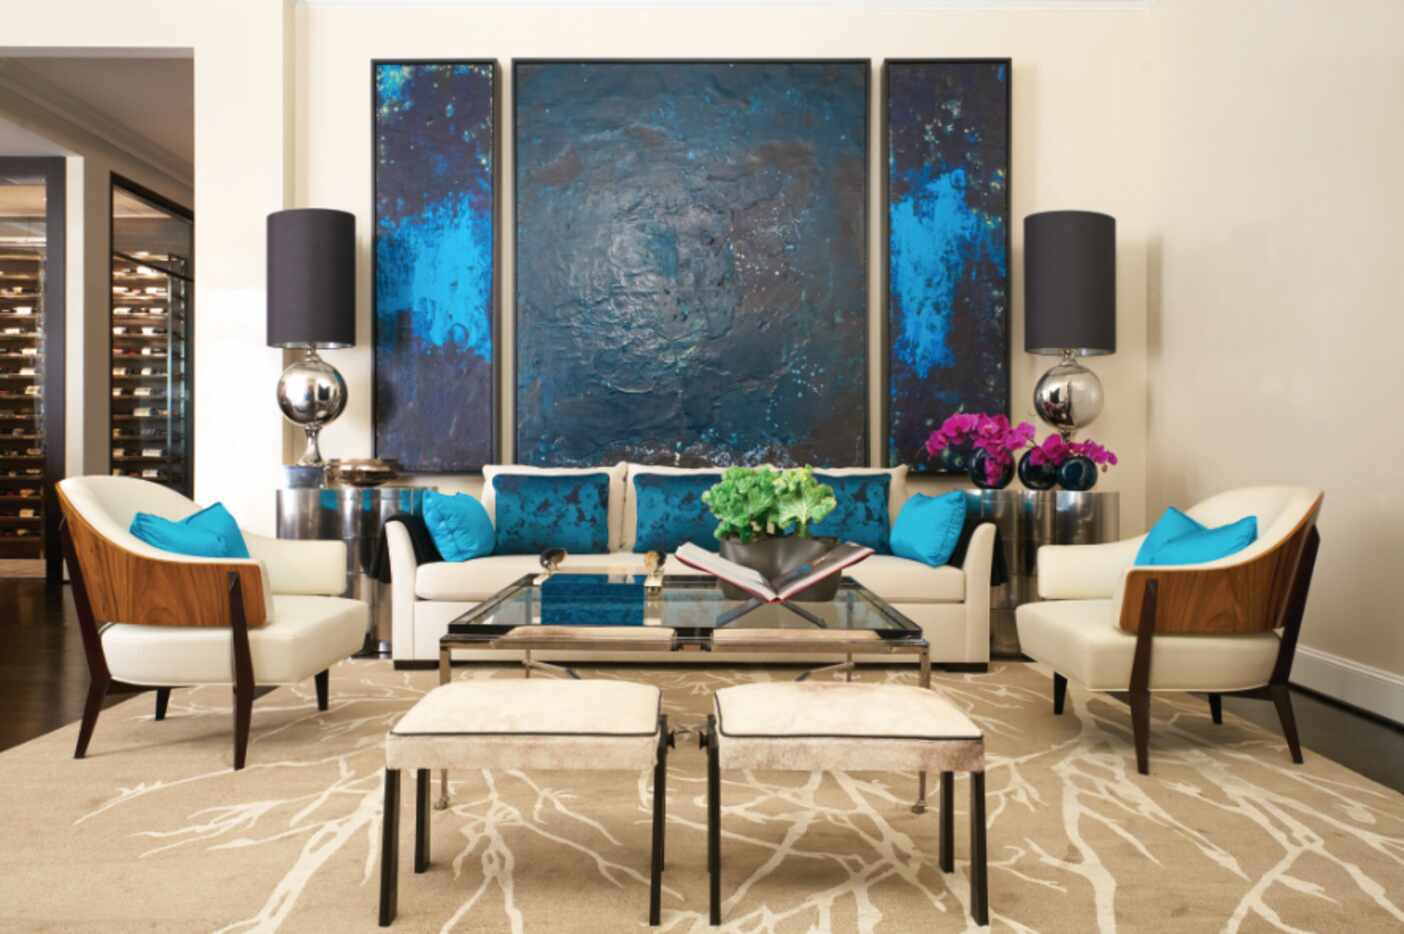 Let your art guide you when deciding what colors to surround yourself with at home. 